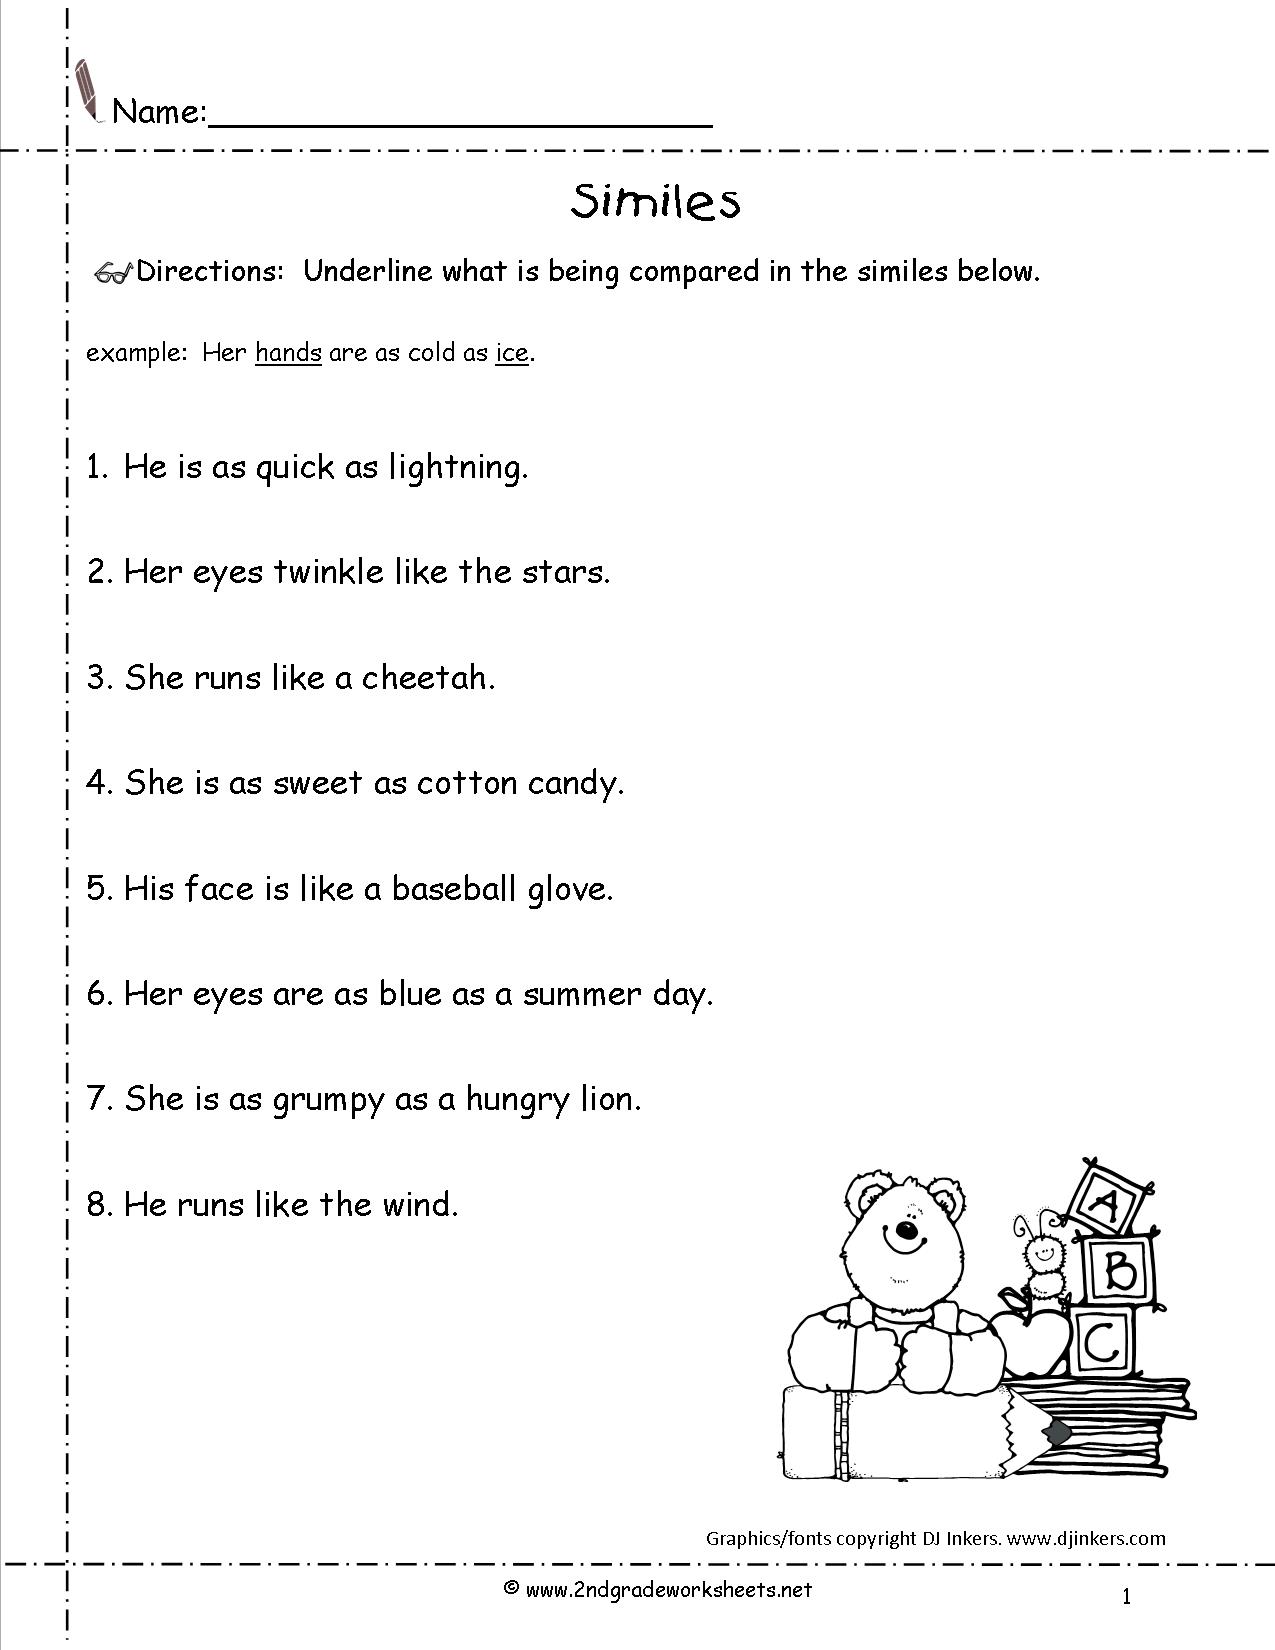 13 Best Images of Simile Worksheets For Teachers - Second Grade Simile